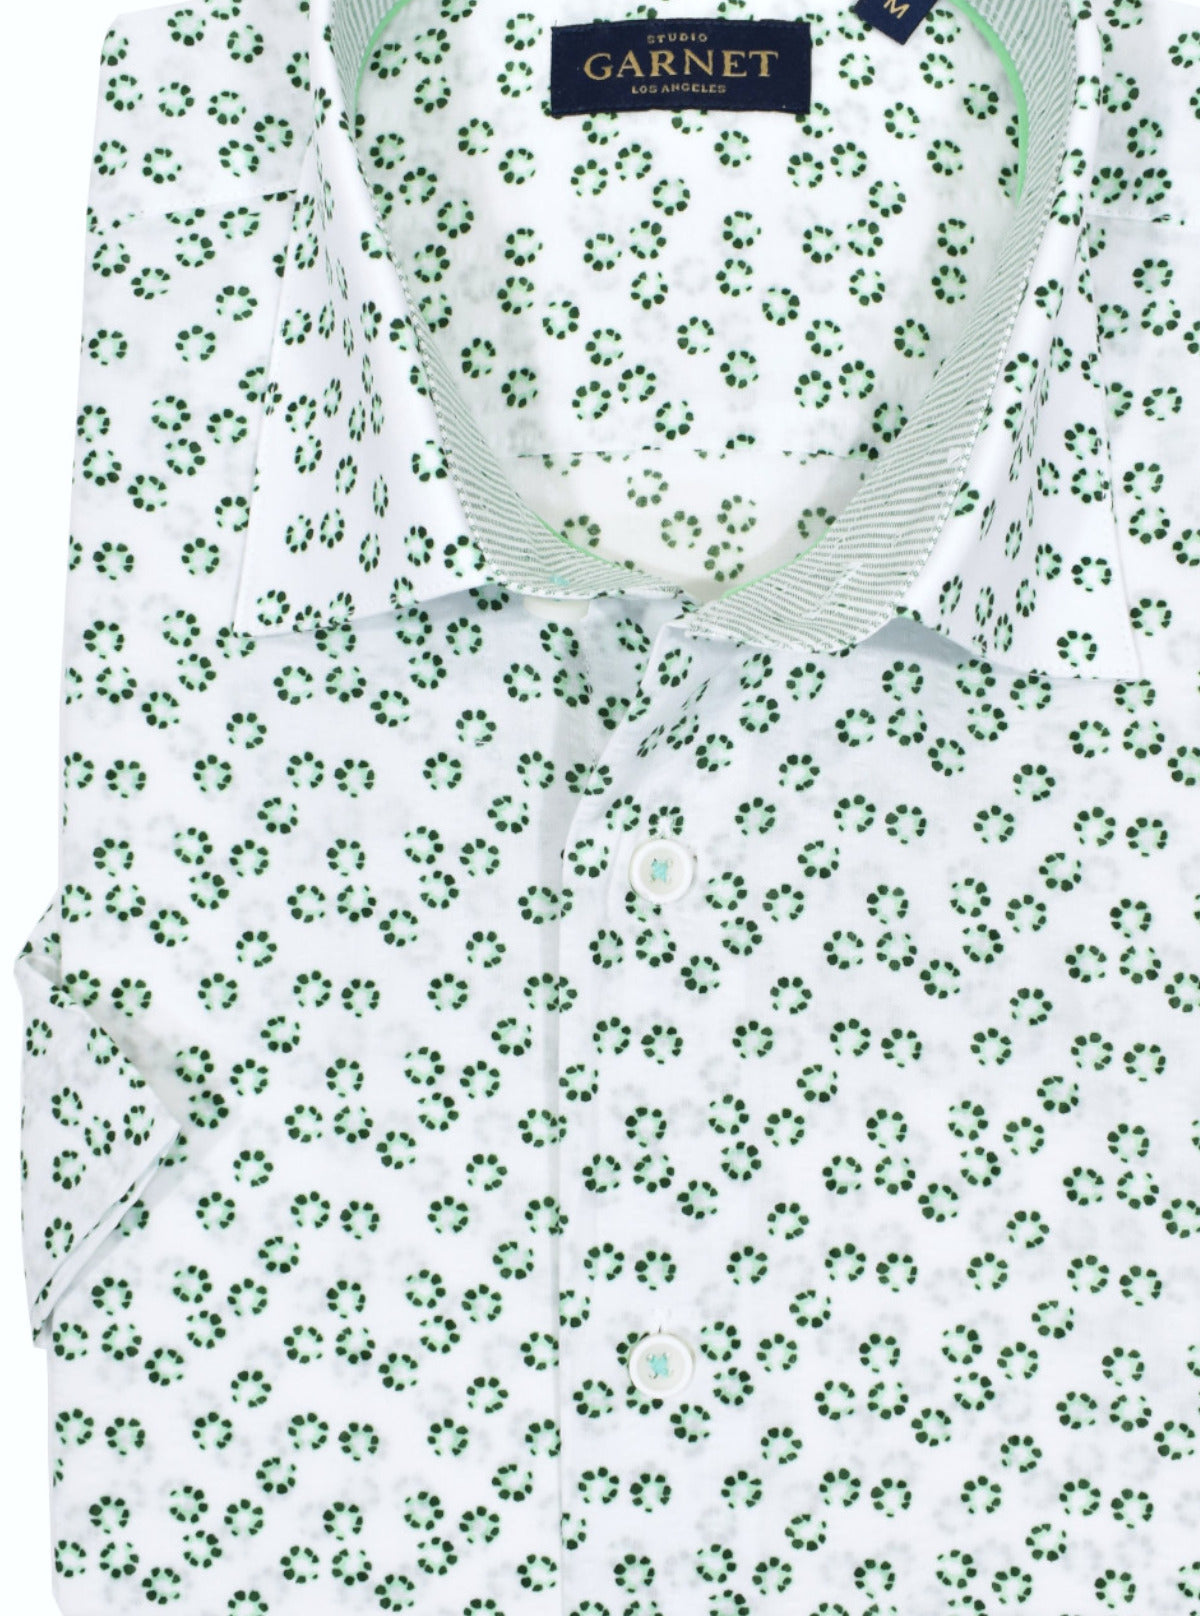 Cotton fabric with a seersucker finish sporting a random petal pattern that gives off a contemporary sporty feel.  Soft washed, contrast trim fabric and matched buttons add to the look.  Classic shaped fit.